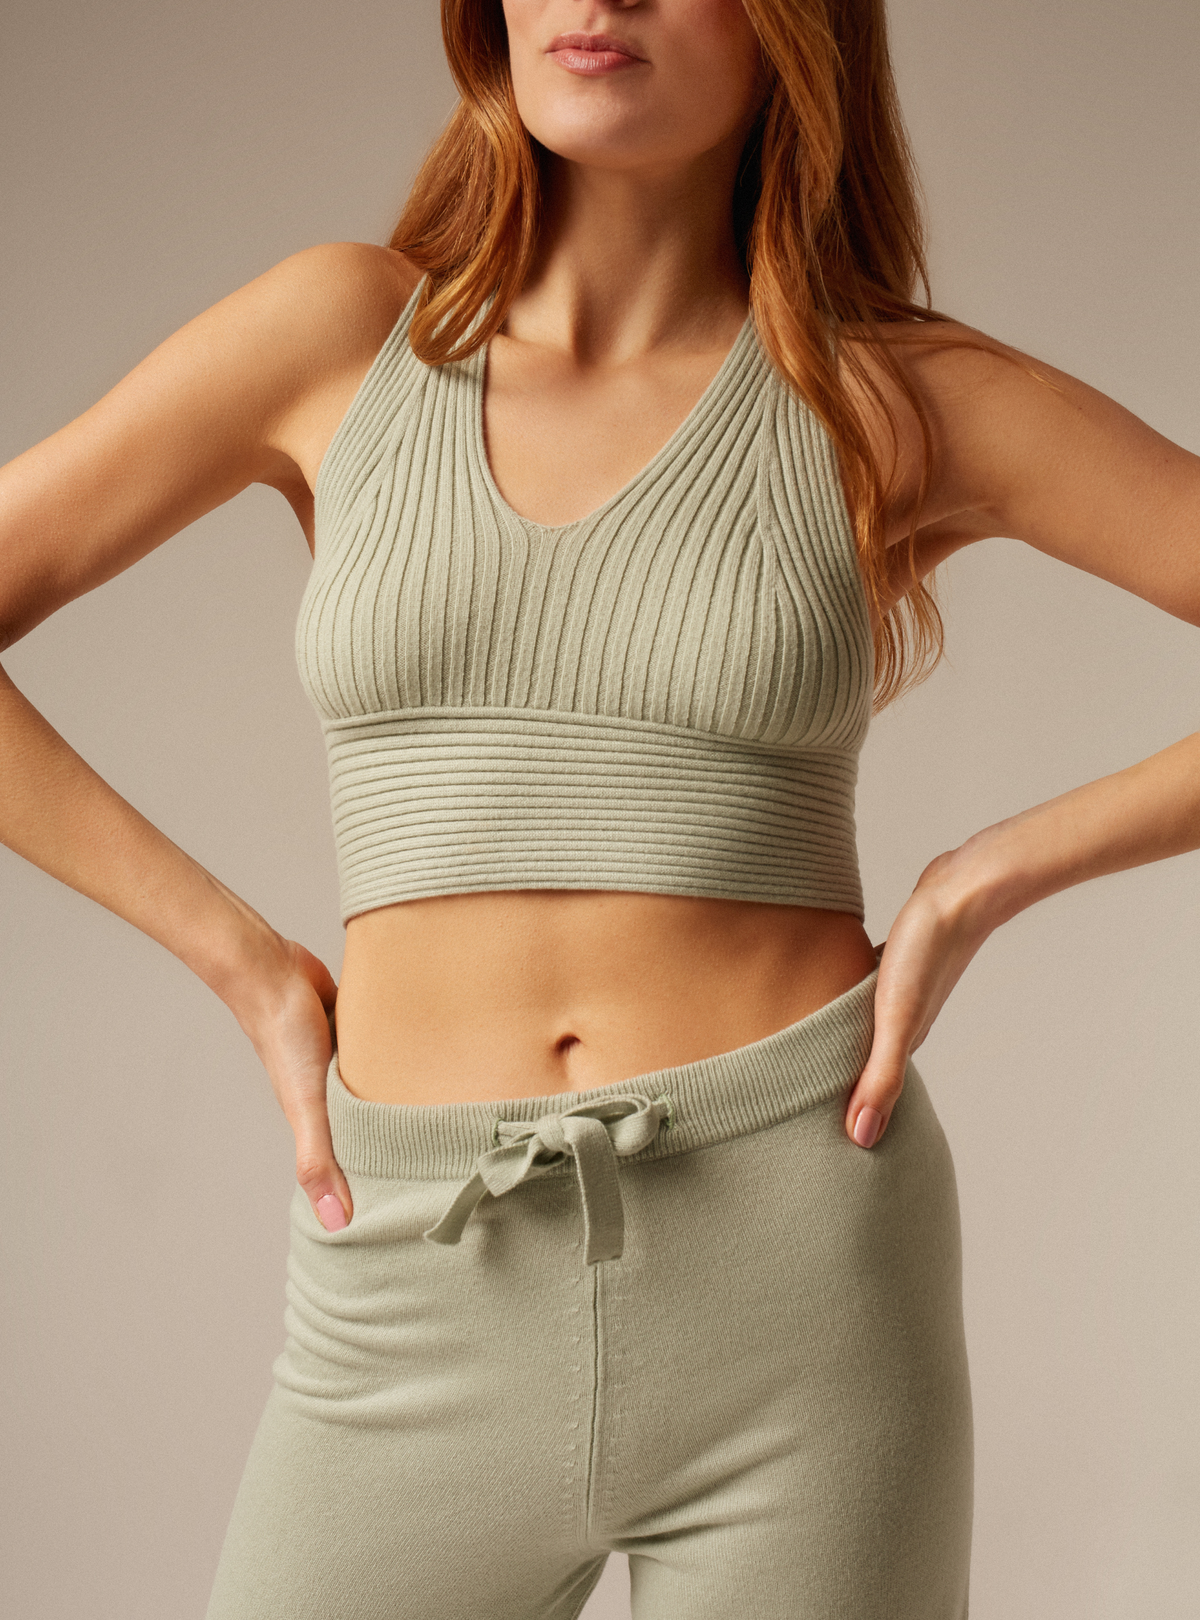 Women&#39;s knitted cashmere bralette top in sage